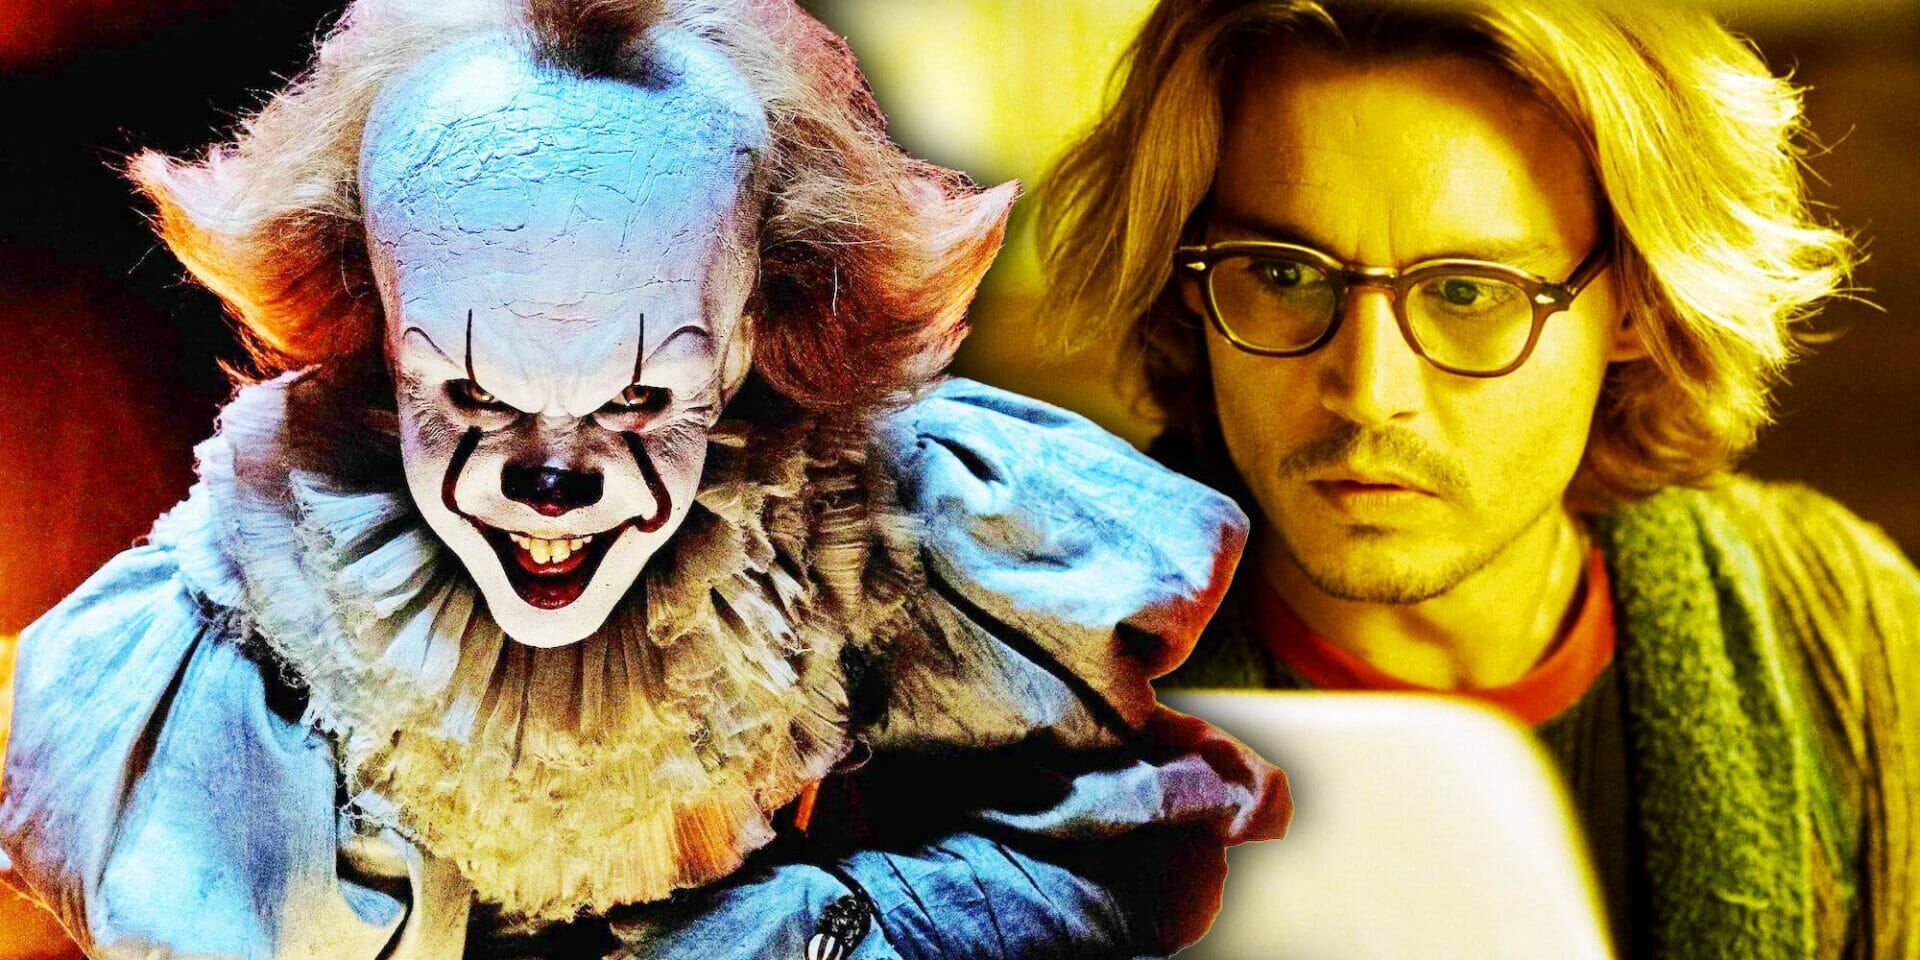 10 Stephen King Books That Are Way Scarier Than The Movie